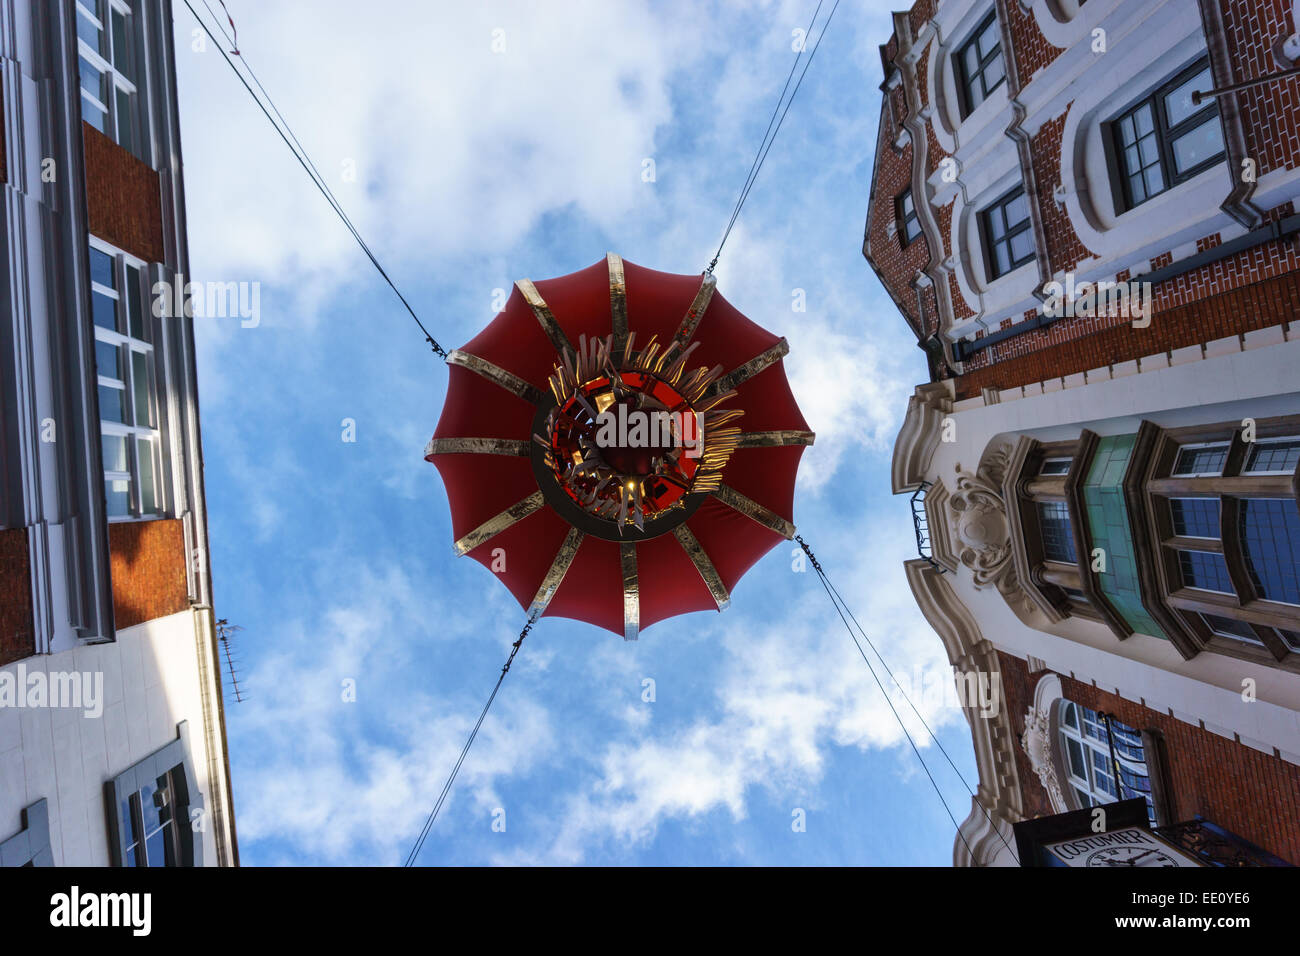 A view from underneath a Chinese Lantern in Chinatown, London Stock Photo